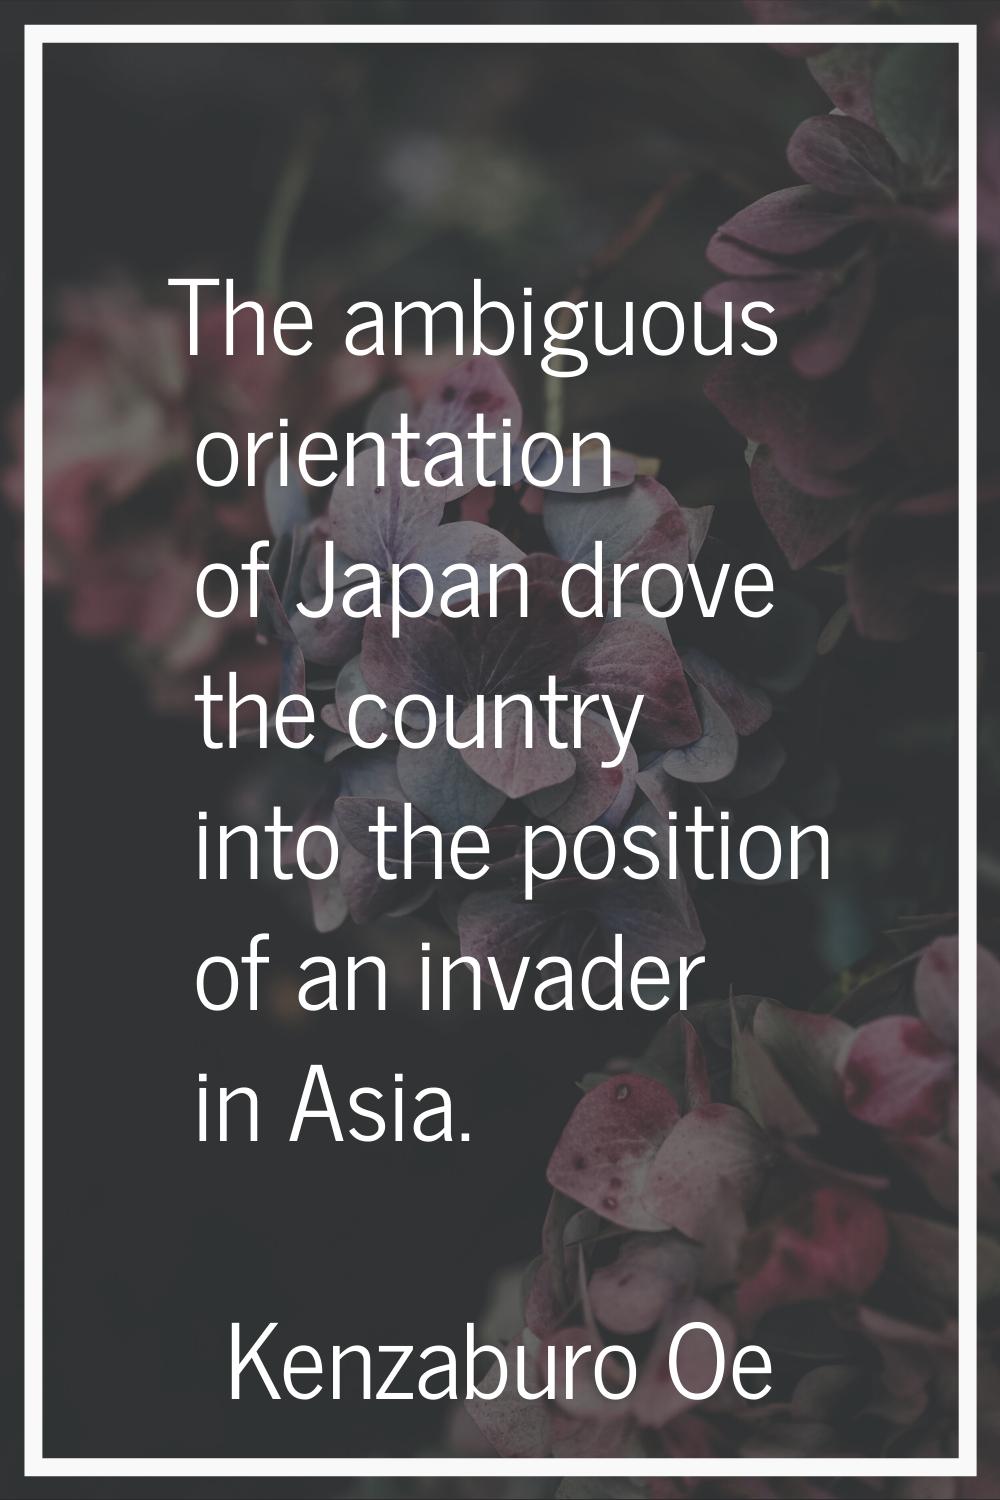 The ambiguous orientation of Japan drove the country into the position of an invader in Asia.